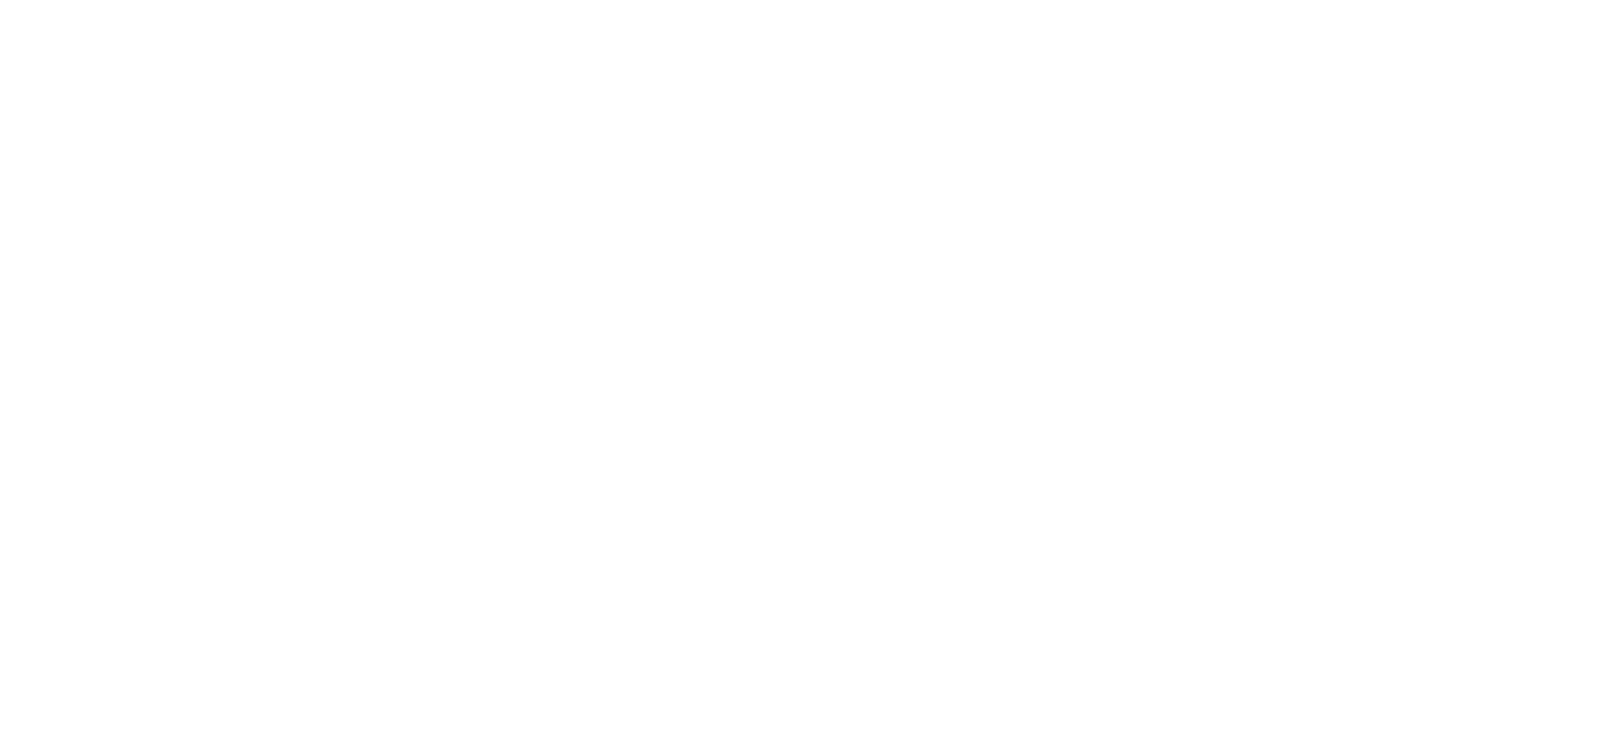 ABR Commercial Mortgage